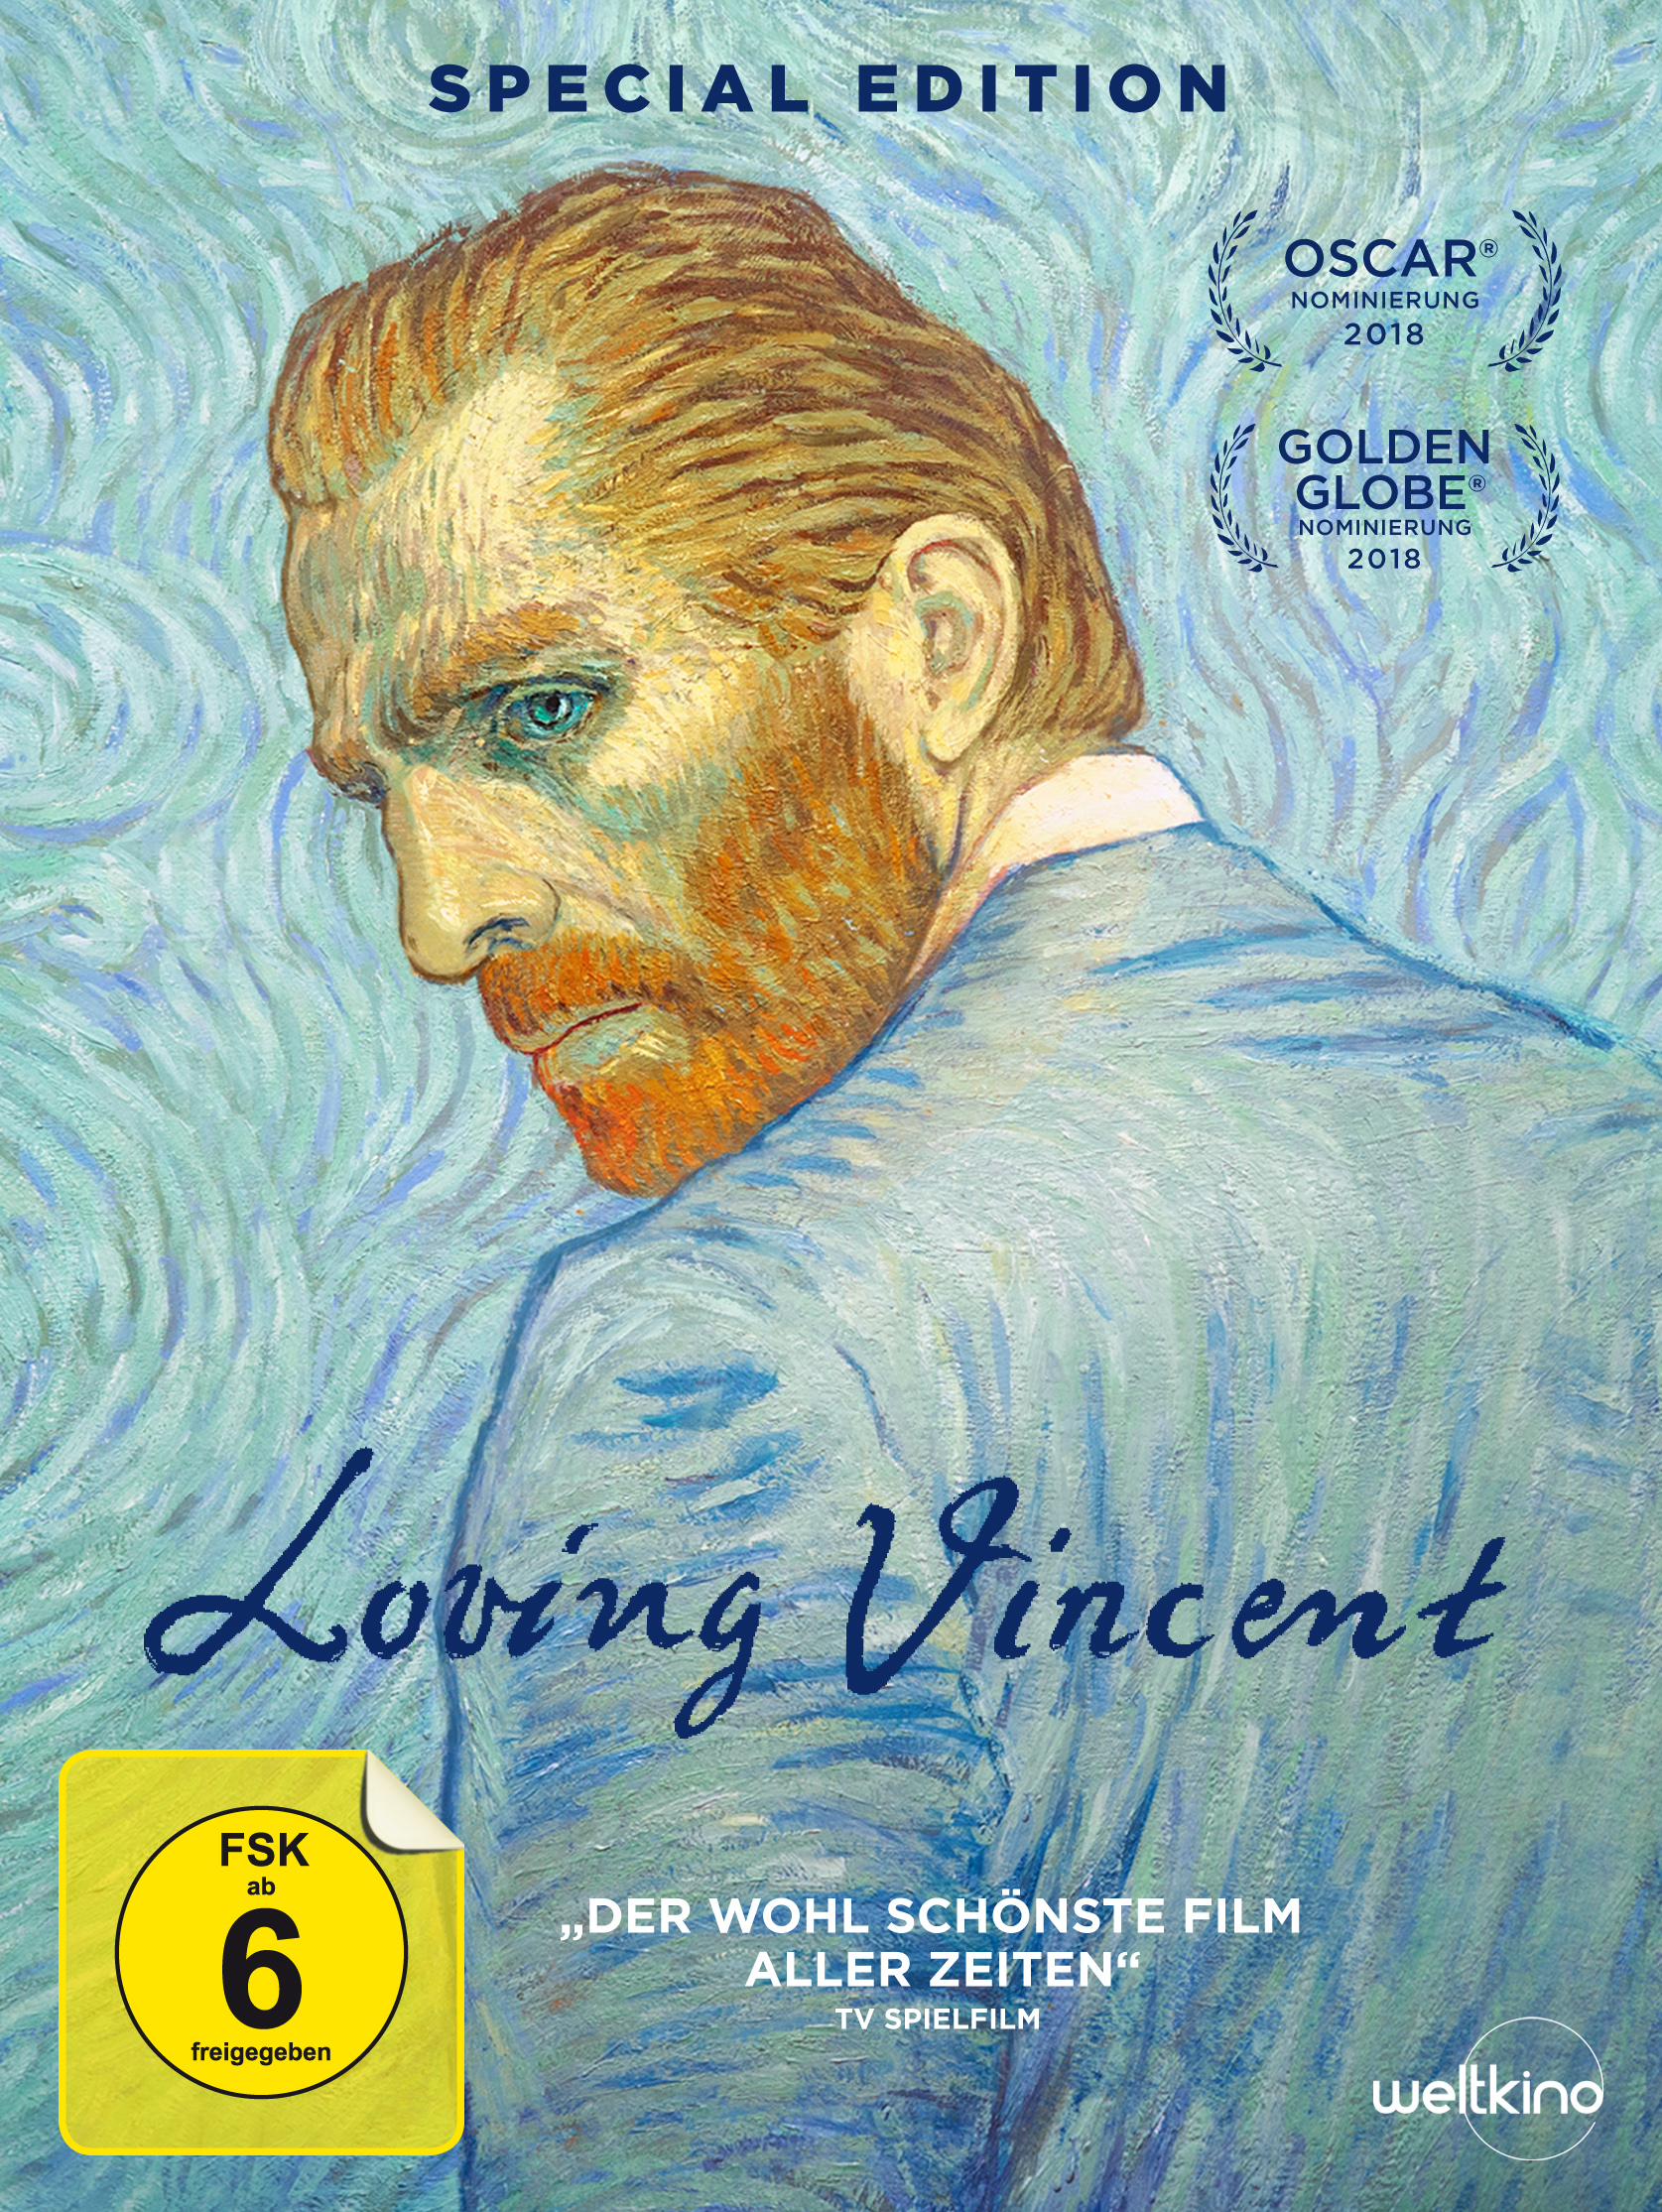 Edition) + Vincent (Limited CD DVD Loving Special